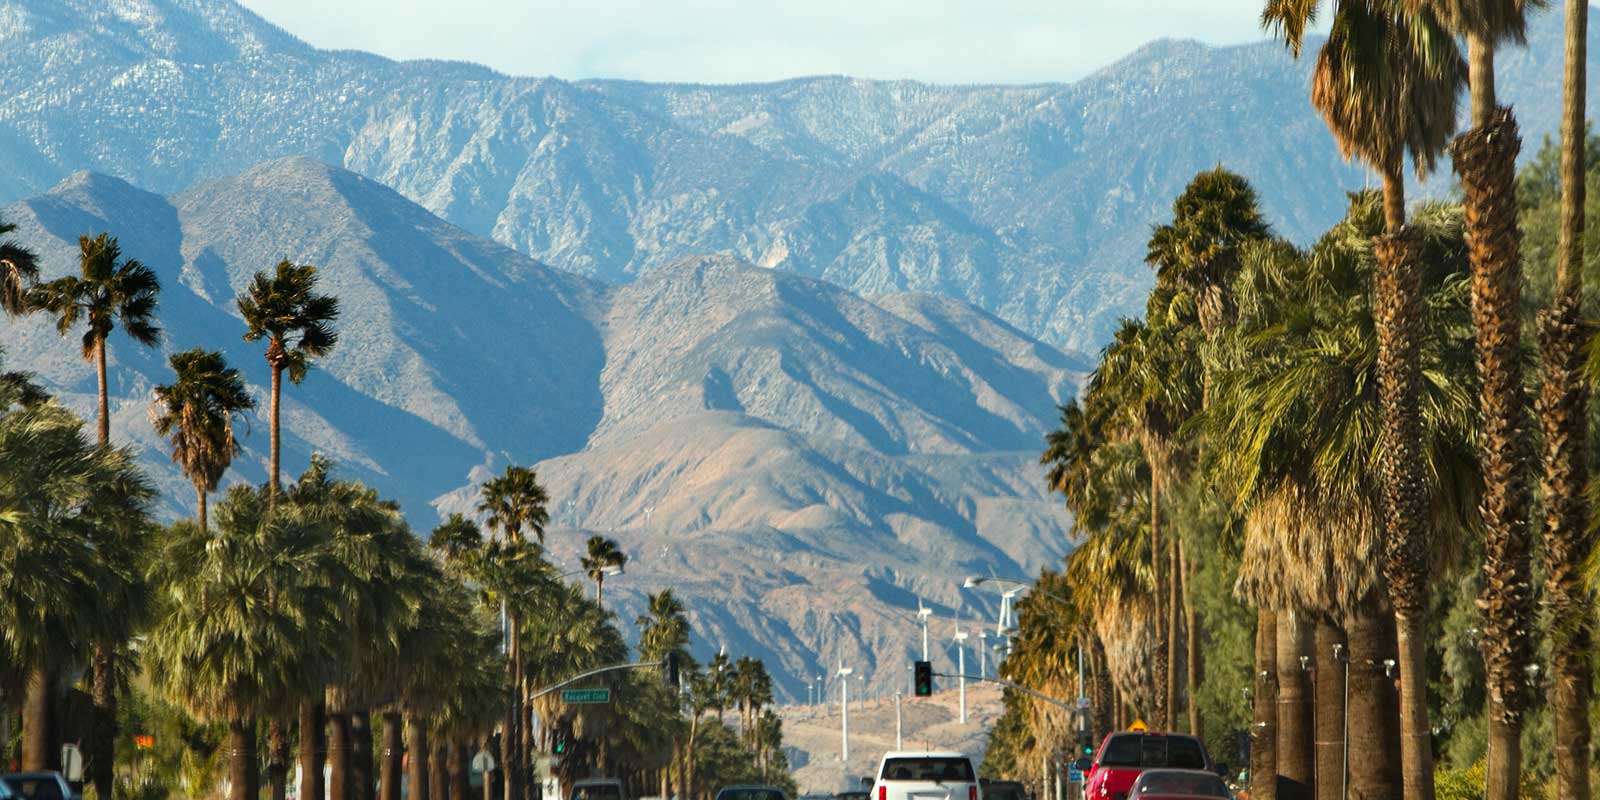 Road in Palm Springs with San Jacinto Mountain in the background